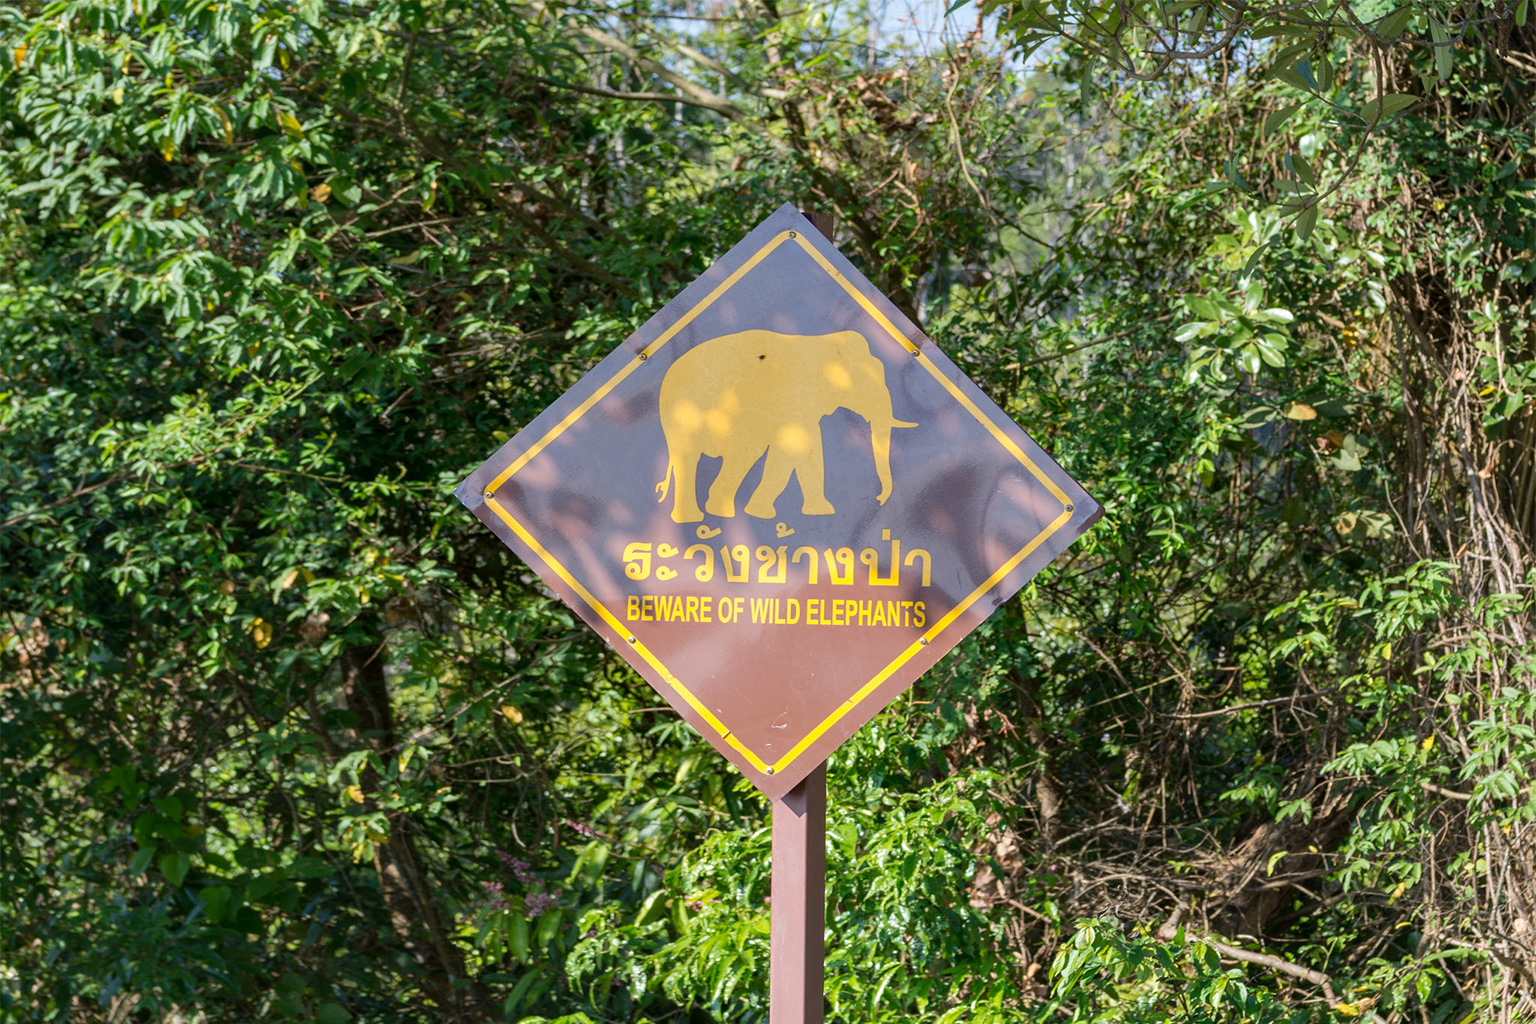 A warning sign about wild elephants.